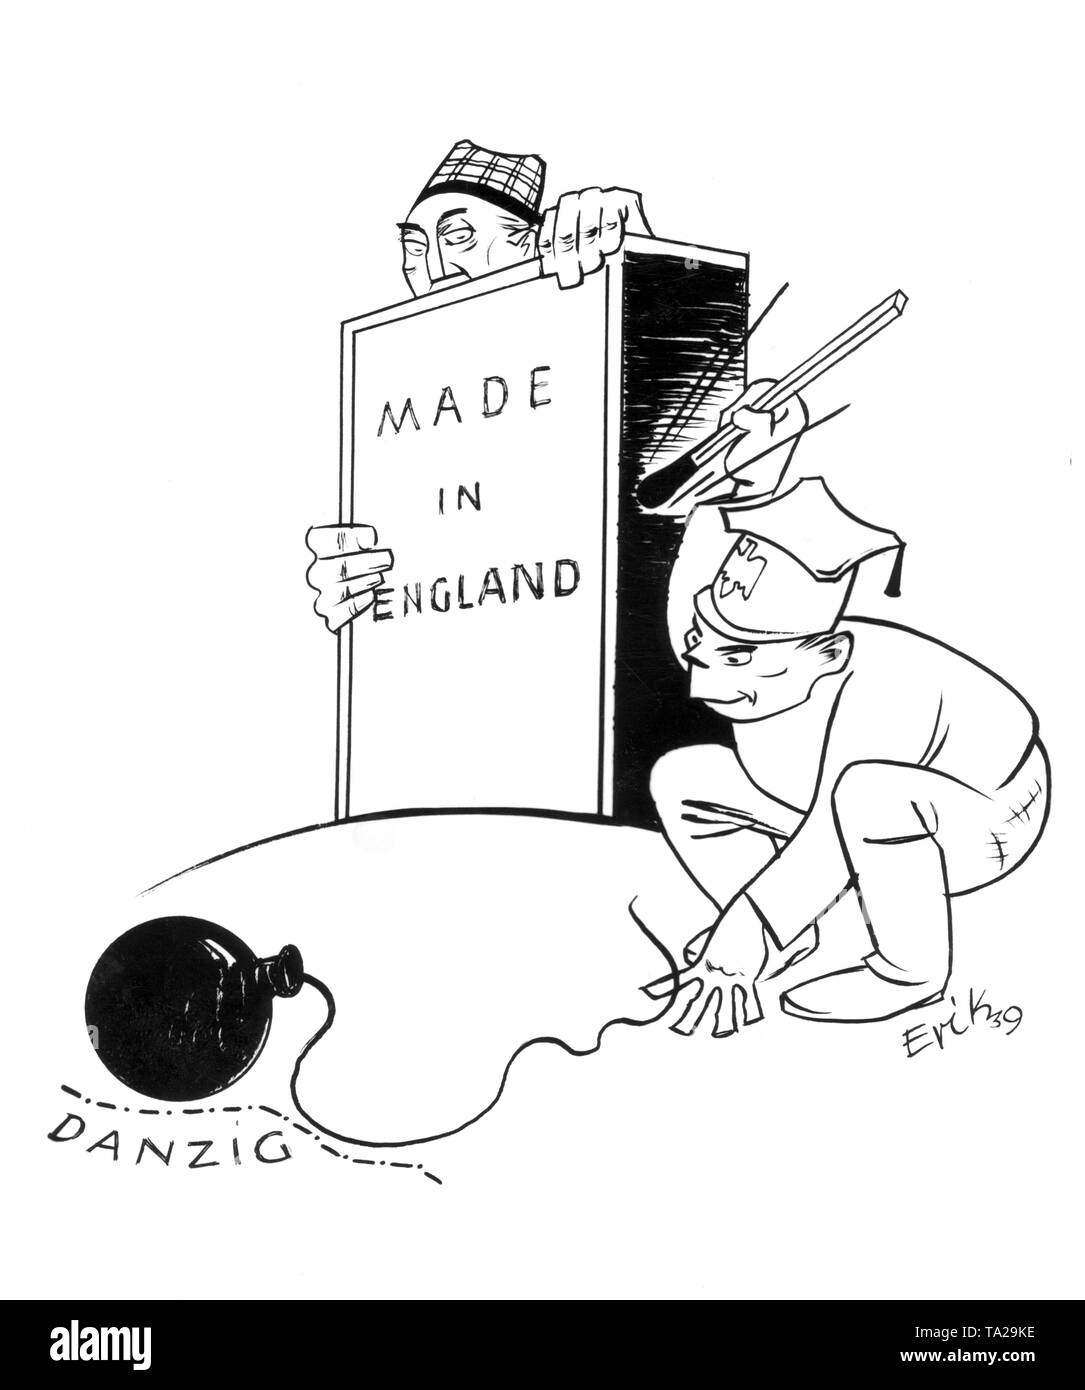 This Nazi propaganda cartoon by Erik shows a Pole trying to light a bomb in Danzig with a match from an English matchbox, watched by a Russian. This caricature is supposed to state that Poland, under the influence of the Soviet government, wants to stack the deck with Danzig, with the support of the Brits, but gets the short end of the stick, because behind Danzig is the German Reich. Stock Photo